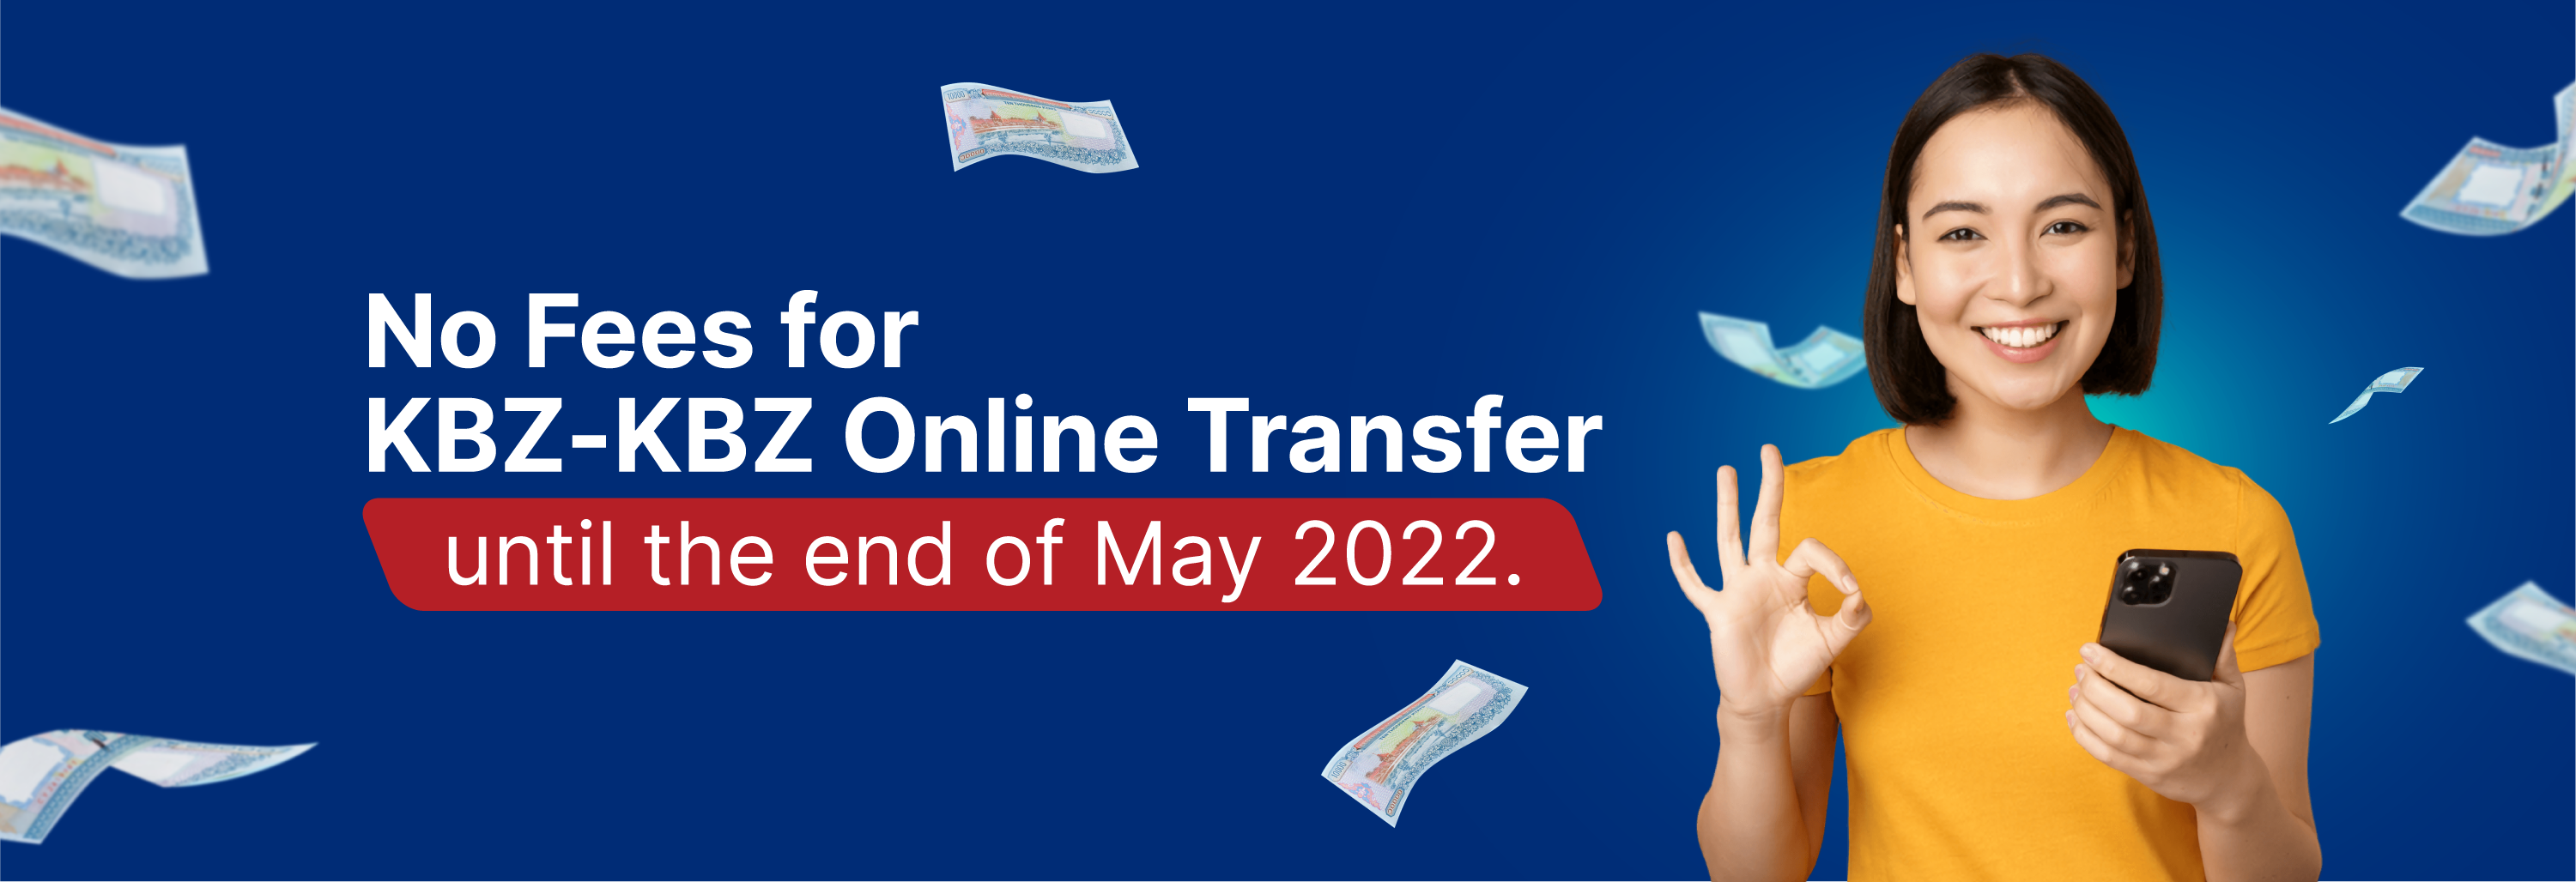 No Fees for KBZ to KBZ Online Transfer Is Extended Until The End of May 2022